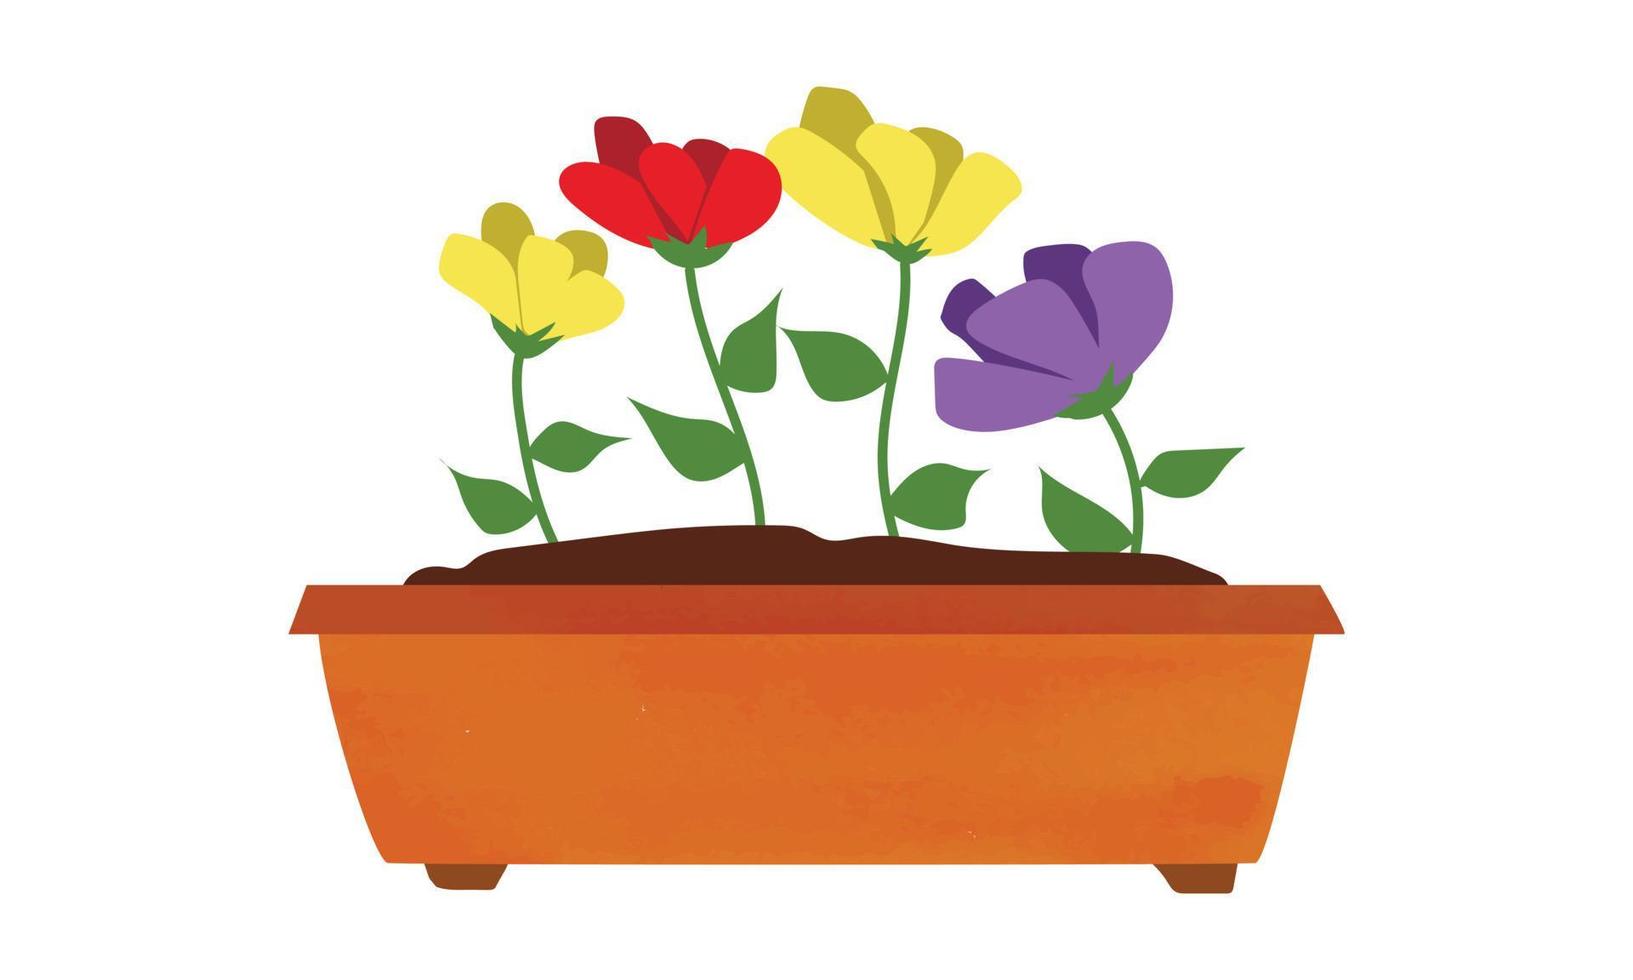 Rectangular pot with colorful flowers watercolor drawing isolated on white background. Rectangular flower pot clipart. Brown plastic flower pot cartoon style. Hand drawn flower pot vector